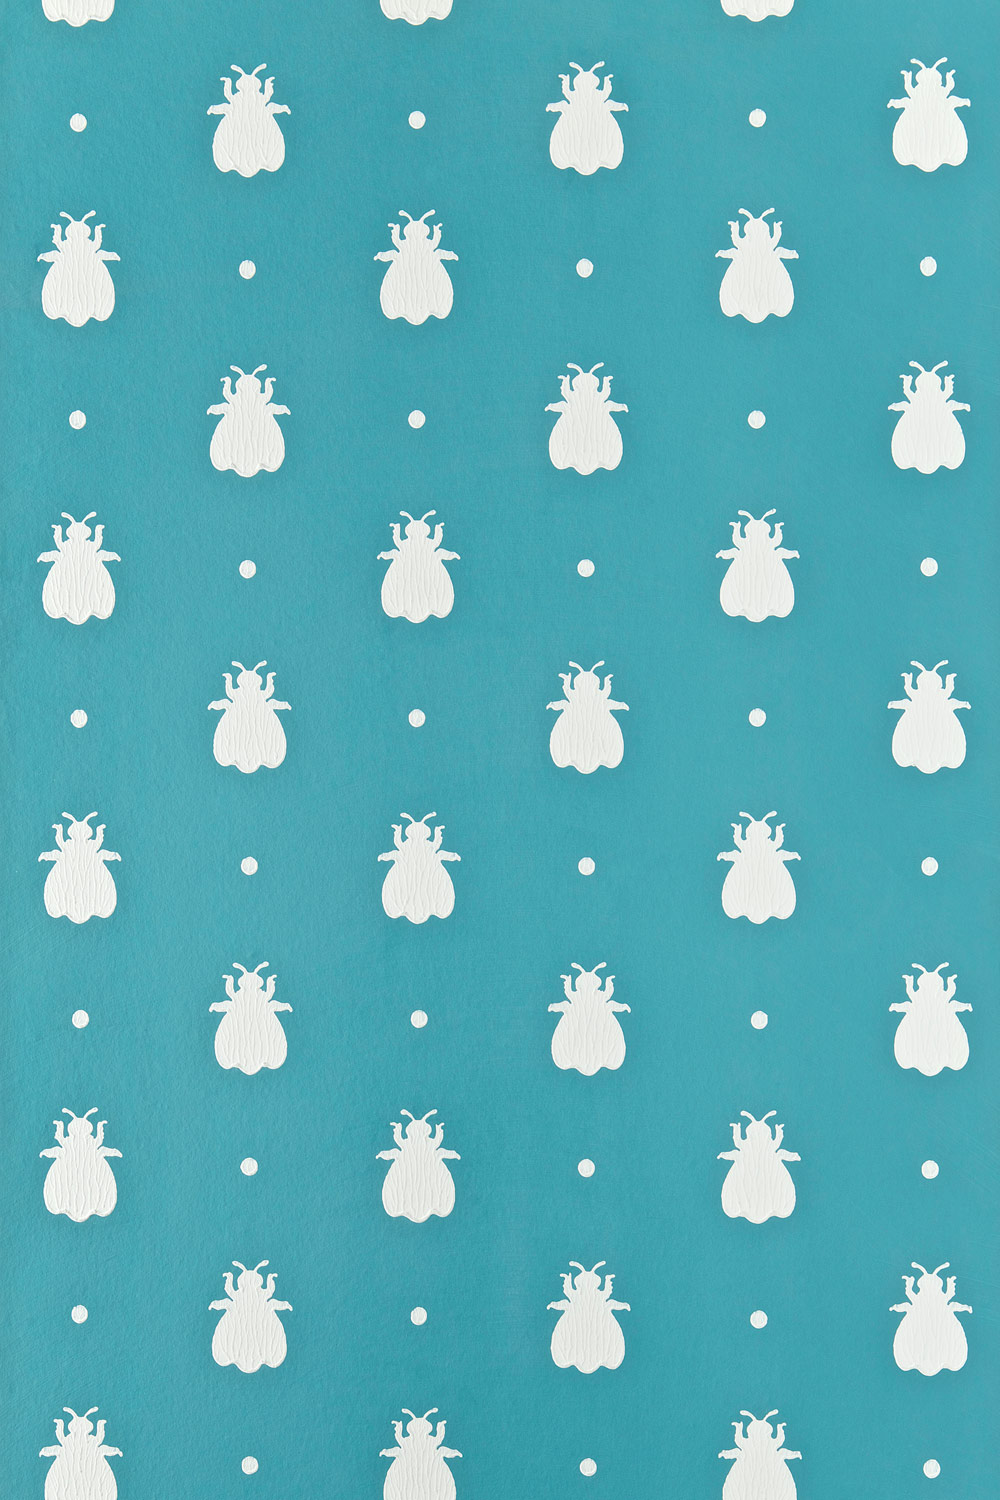 farrow and ball bumblebee wallpaper,blue,aqua,pattern,turquoise,wrapping paper